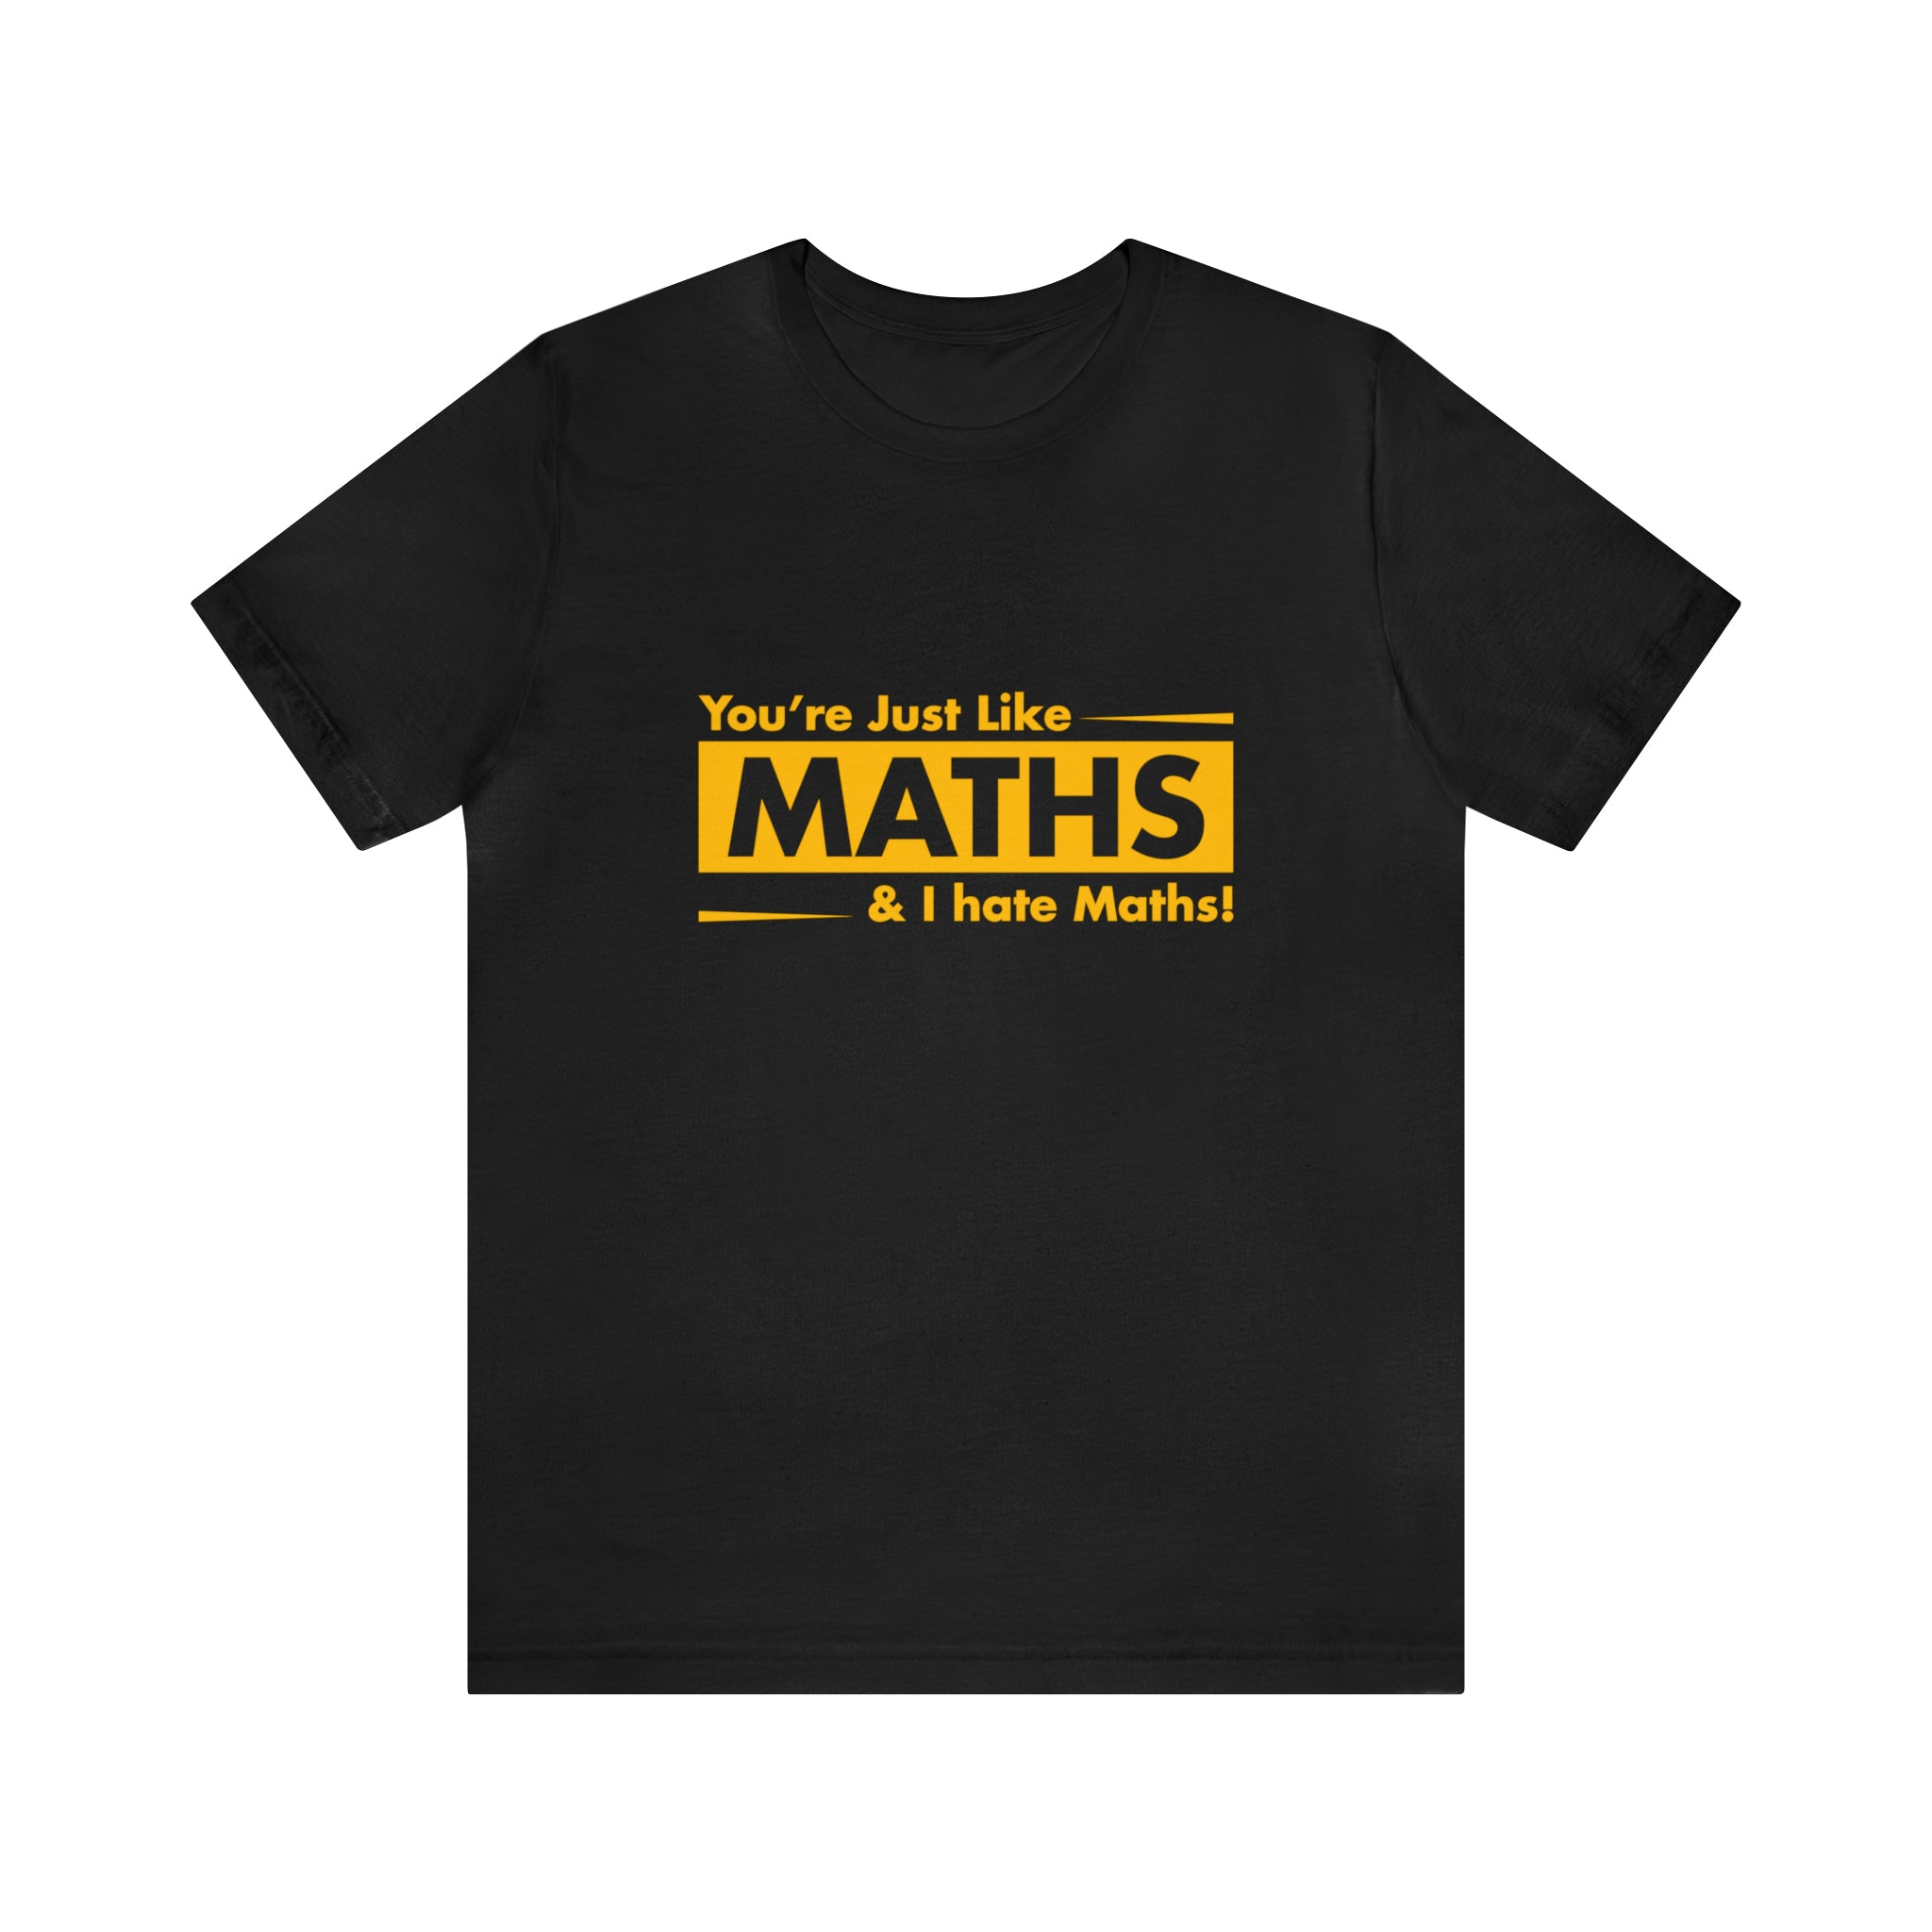 A fashionable black "You are just like maths and I hate maths" T-Shirt that boldly declares you're not like maths.